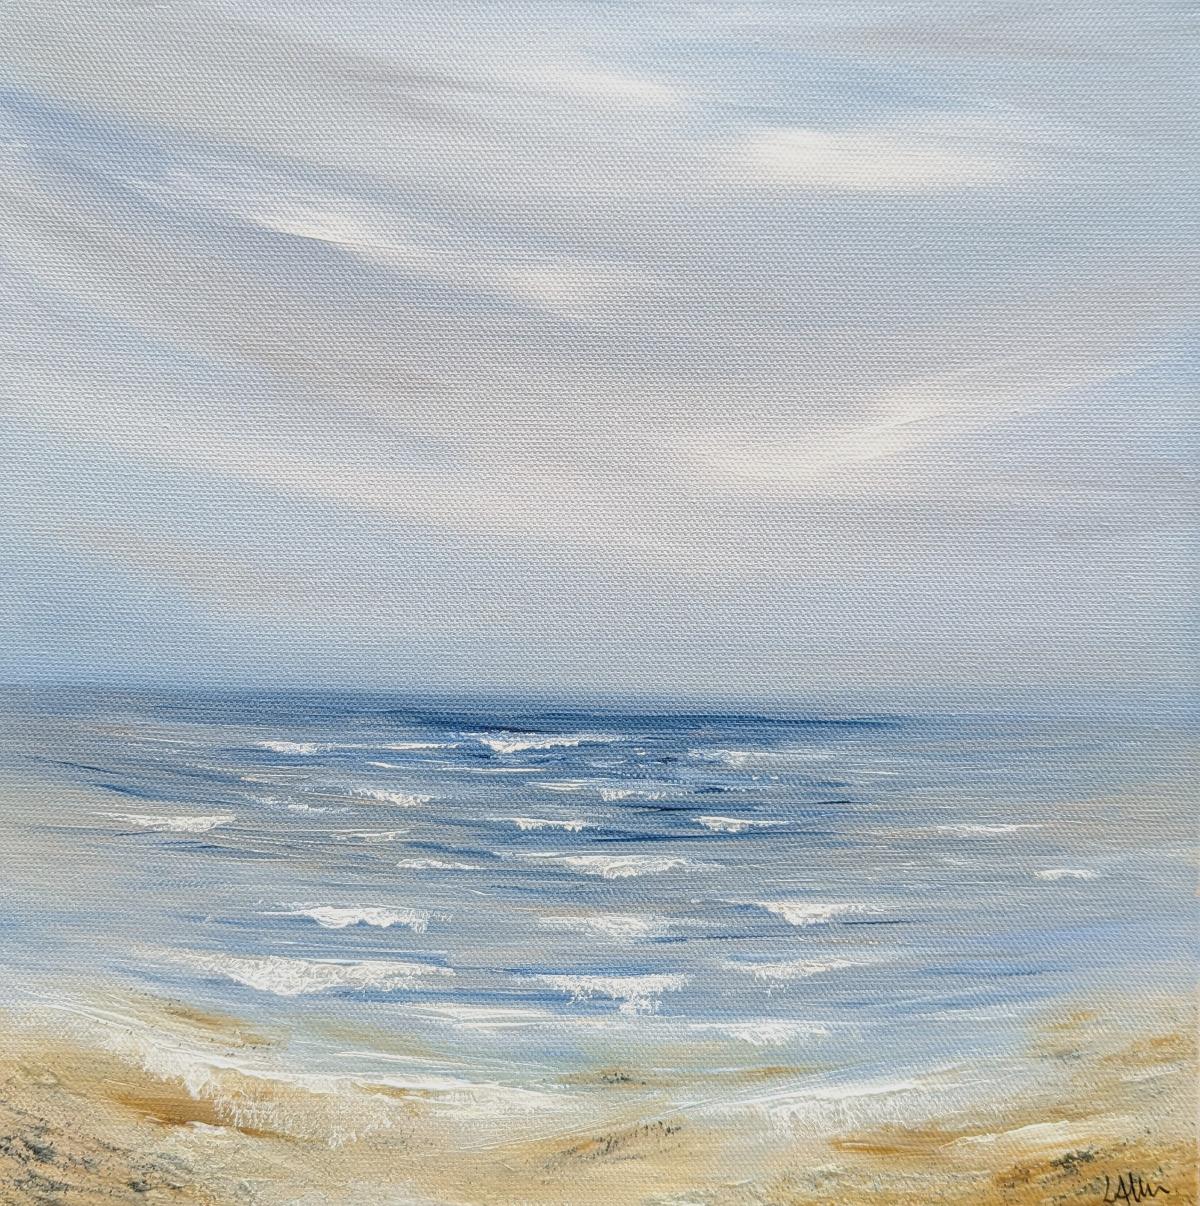 The Calm Before The Storm #3 – By Lucy Moore [2023]

The Calm Before The Storm #3 - An seascape painting by Lucy Moore. When winter roles in it slowly strips the earth of her colour and vibrancy, the grey storm clouds creep along the sky threating